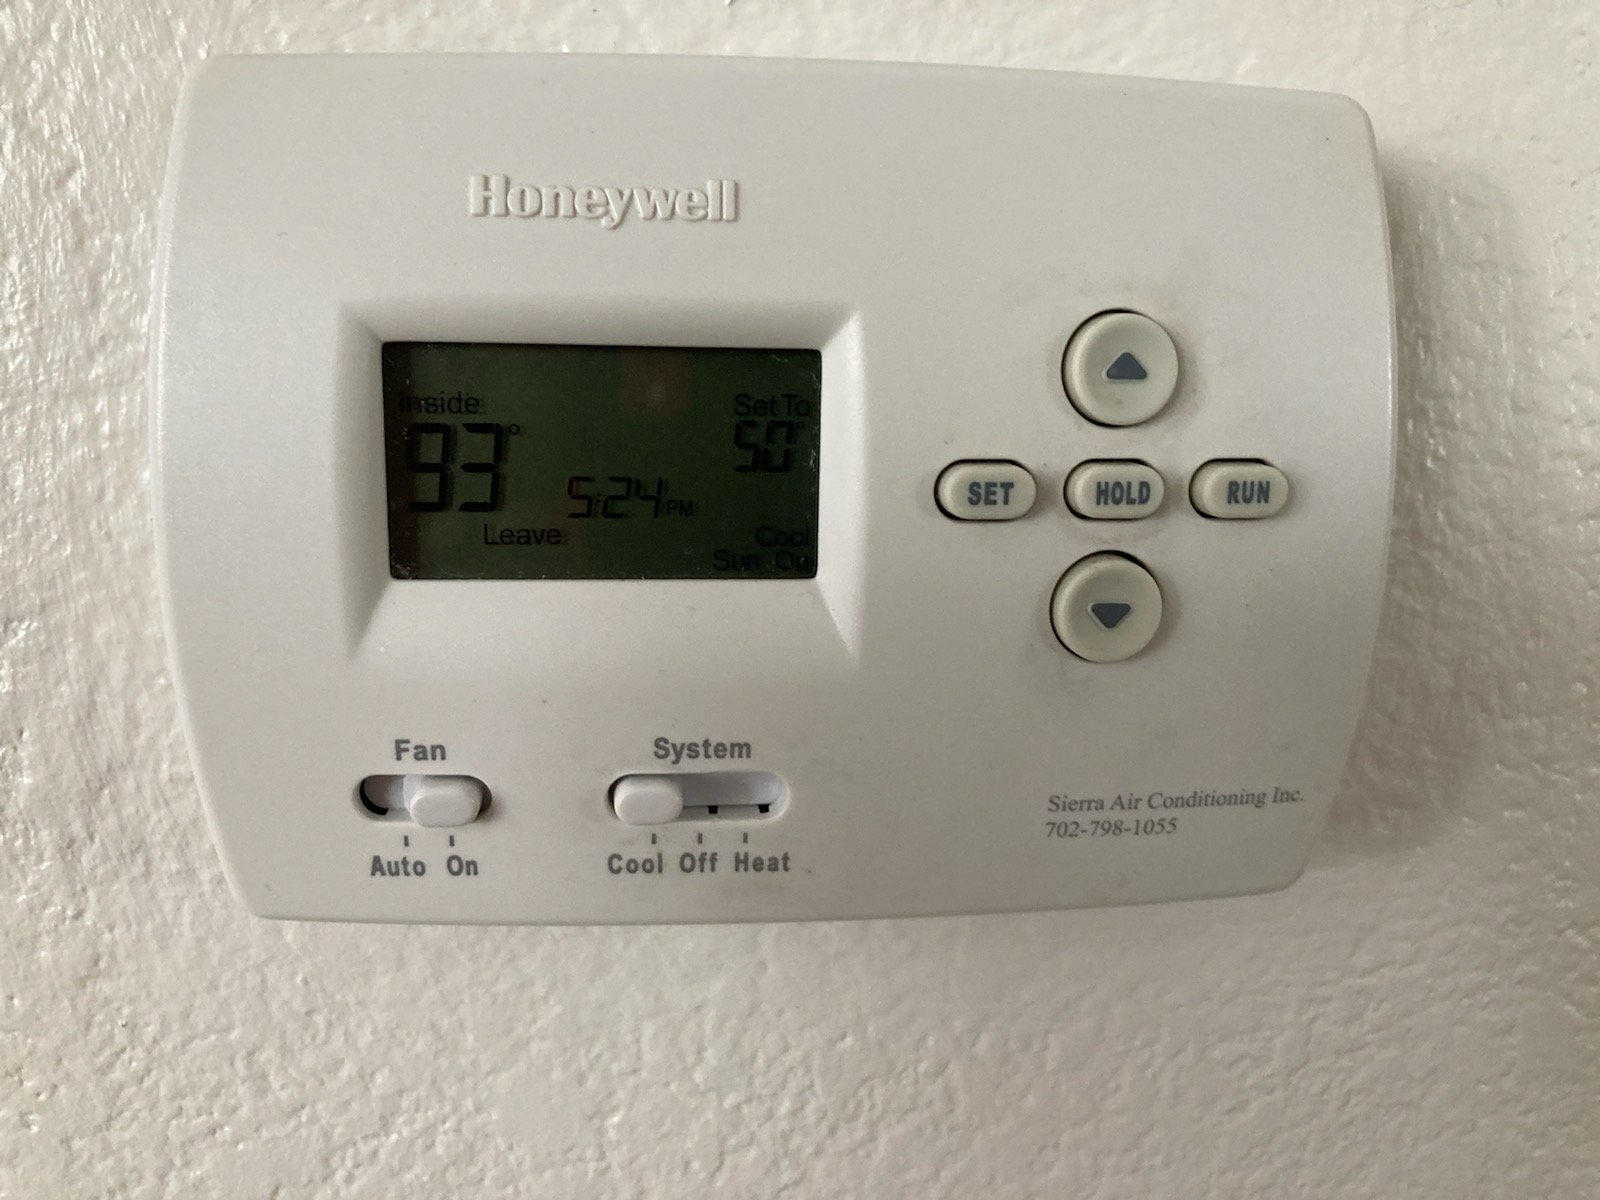 How Do I Reset My Honeywell Thermostat? About 14 Years Old tout Honeywell Hvac Repair Nashville